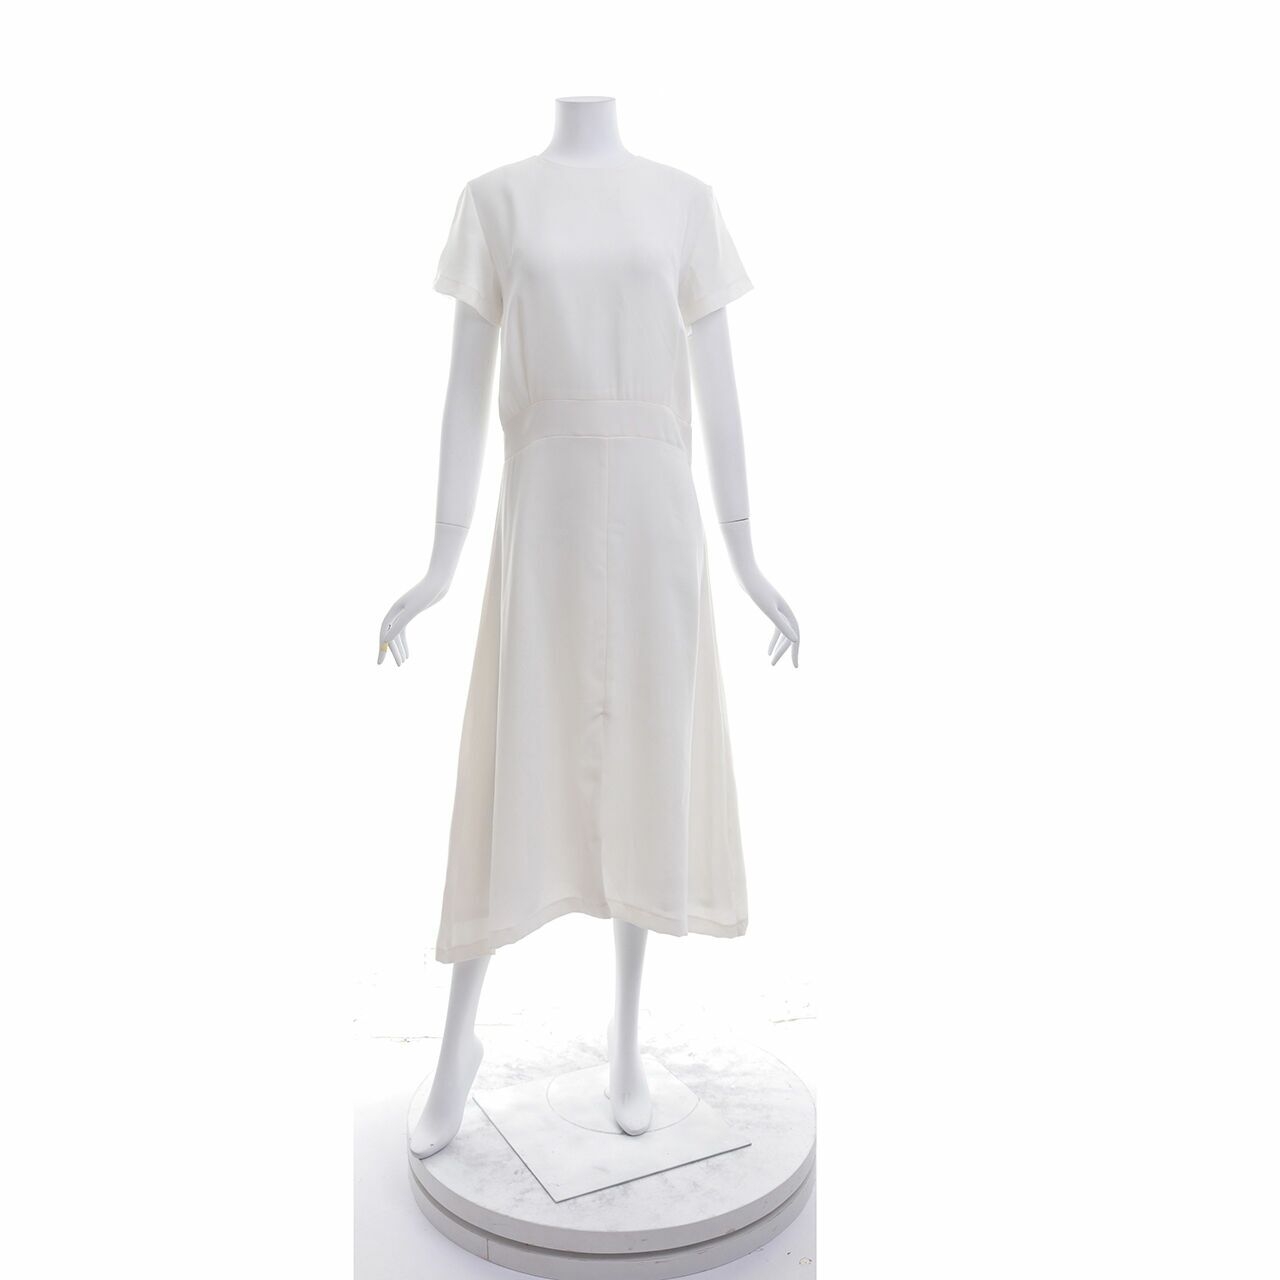 Decameo Label White Long Dress